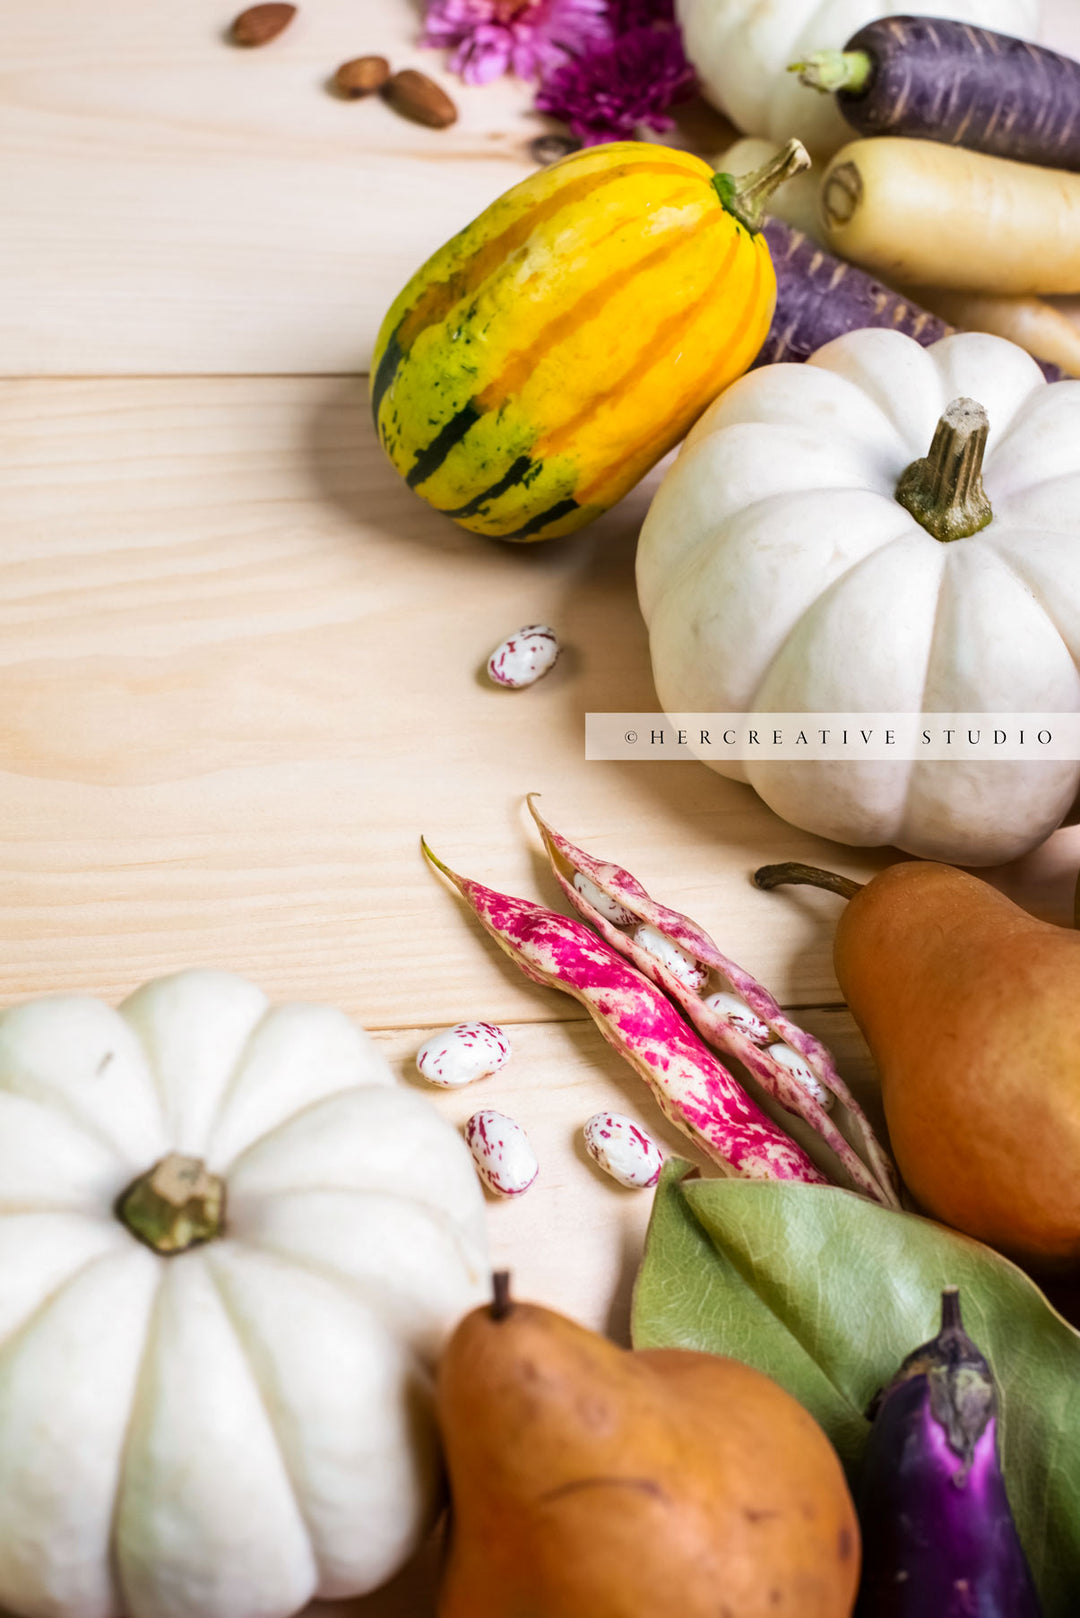 Fall Harvest with Pumpkins & Pears